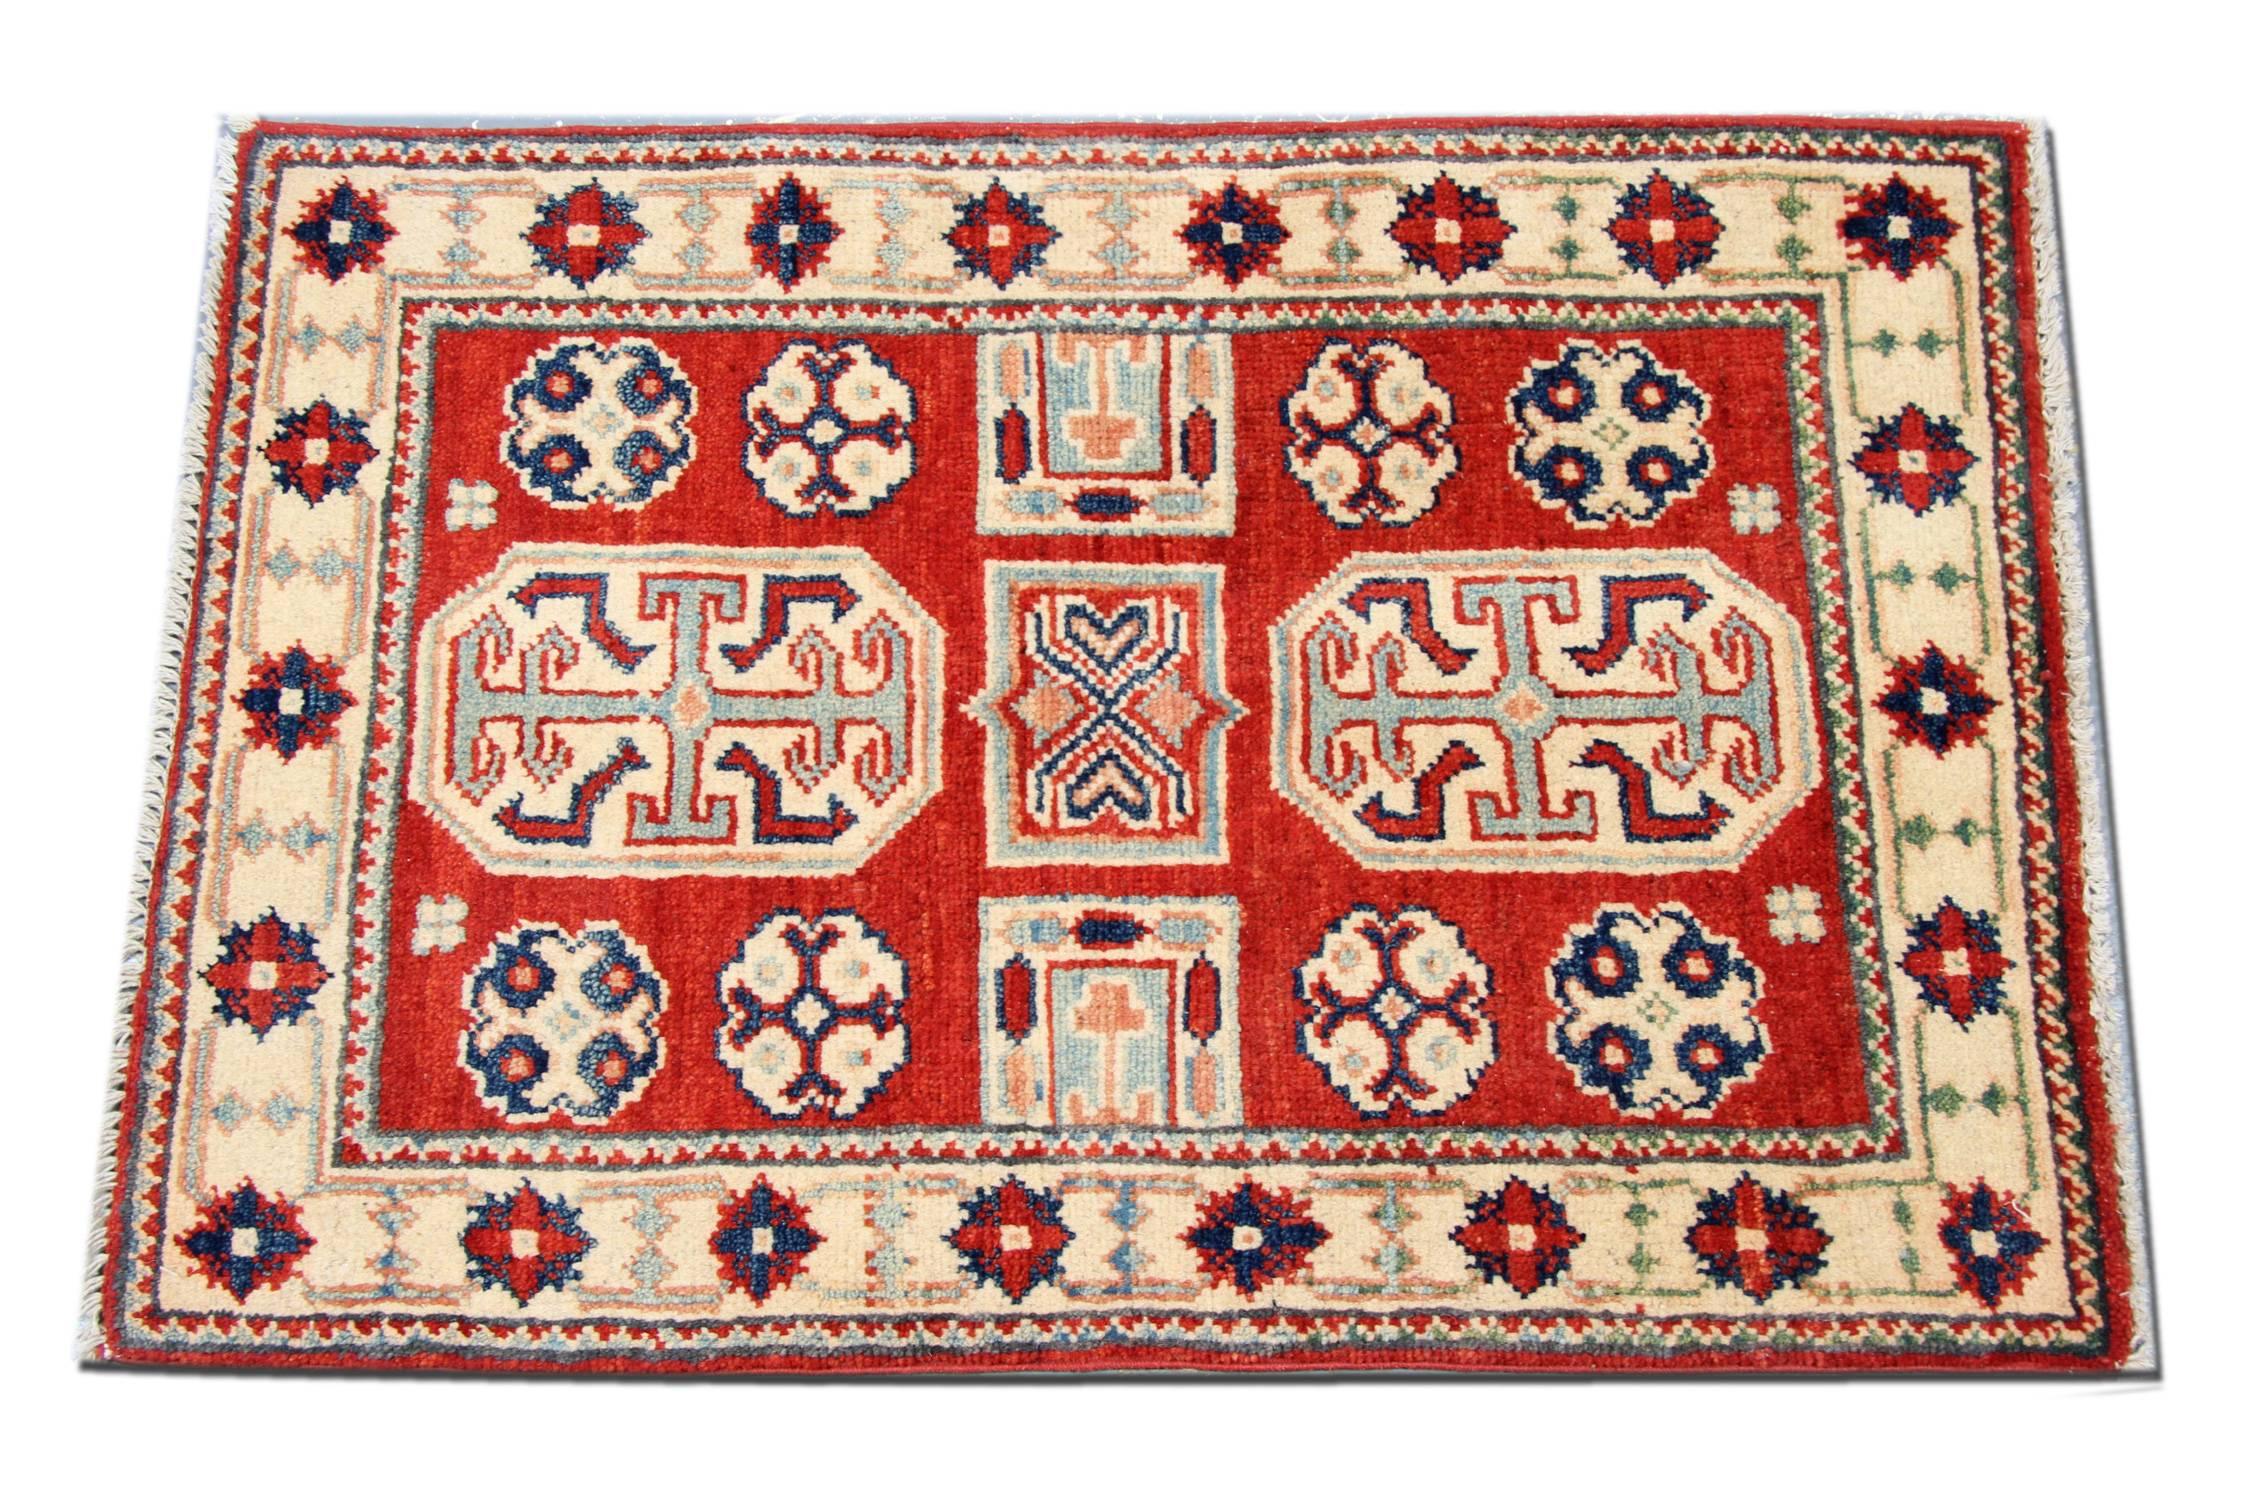 This Kazak red rug has a traditional border with two medallions. The central area of this tribal rug symbolises a garden of paradise protected by the 'walls' of geometric rug patterns. Traditional rugs would complement your home as floor rugs. These